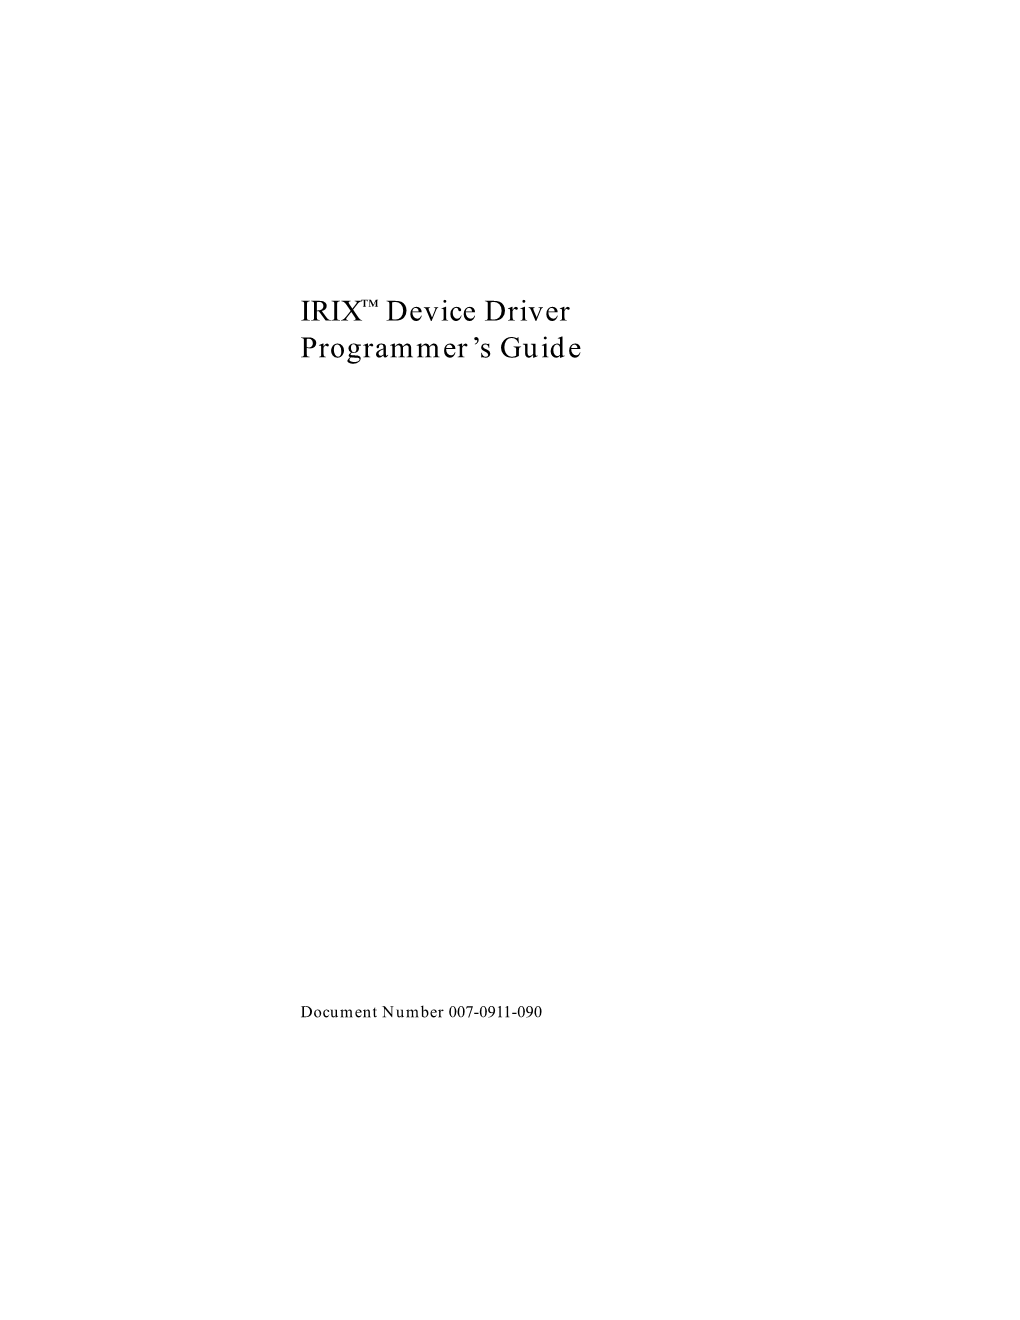 IRIX™ Device Driver Programmer's Guide